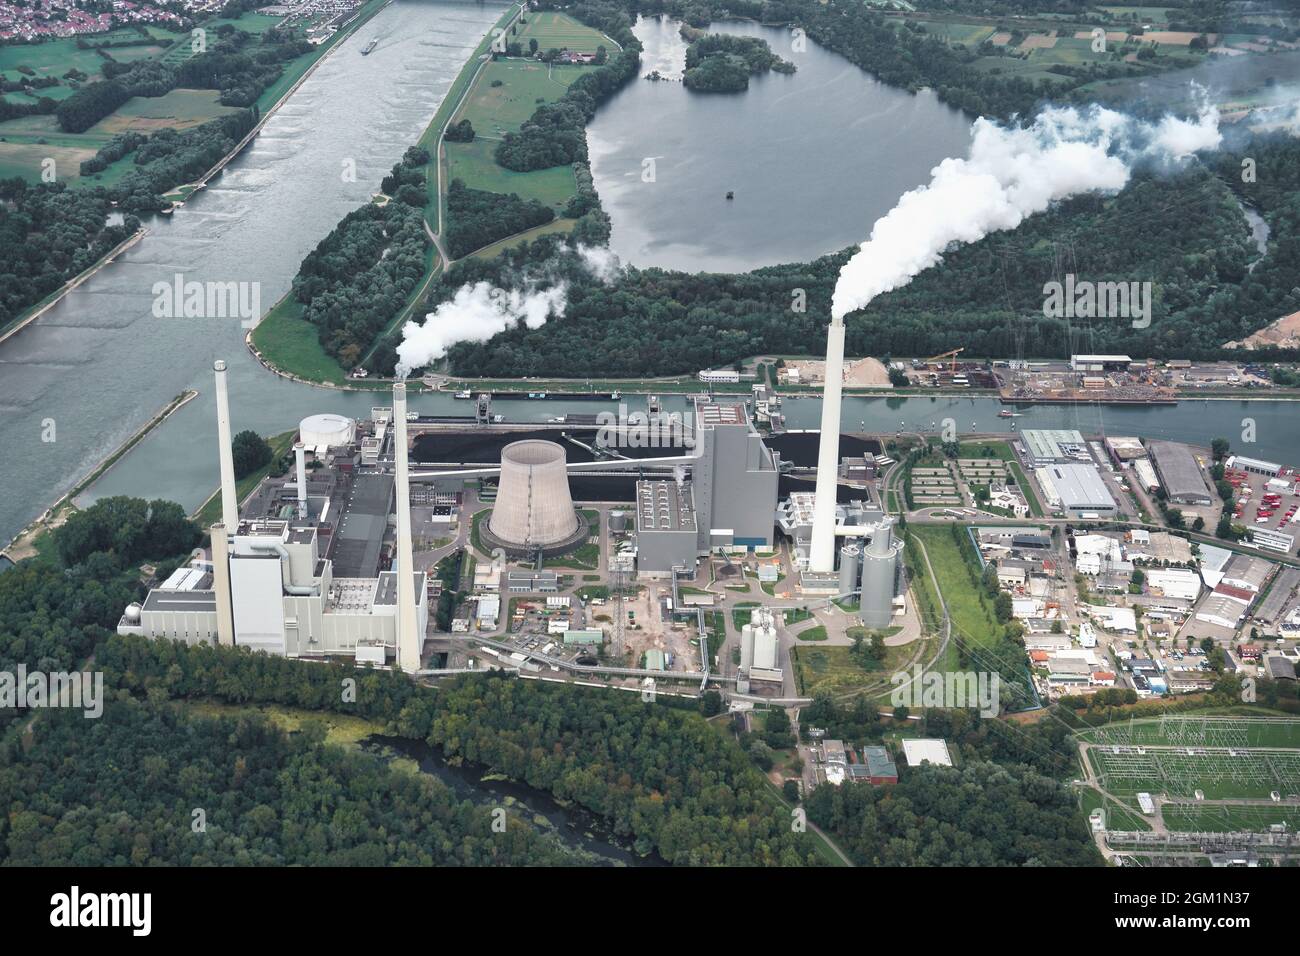 Aerial view of steam and coal power plant in Karlsruhe, rhine harbor. Thermal power station operated by EnBW energy company, Germany. Stock Photo